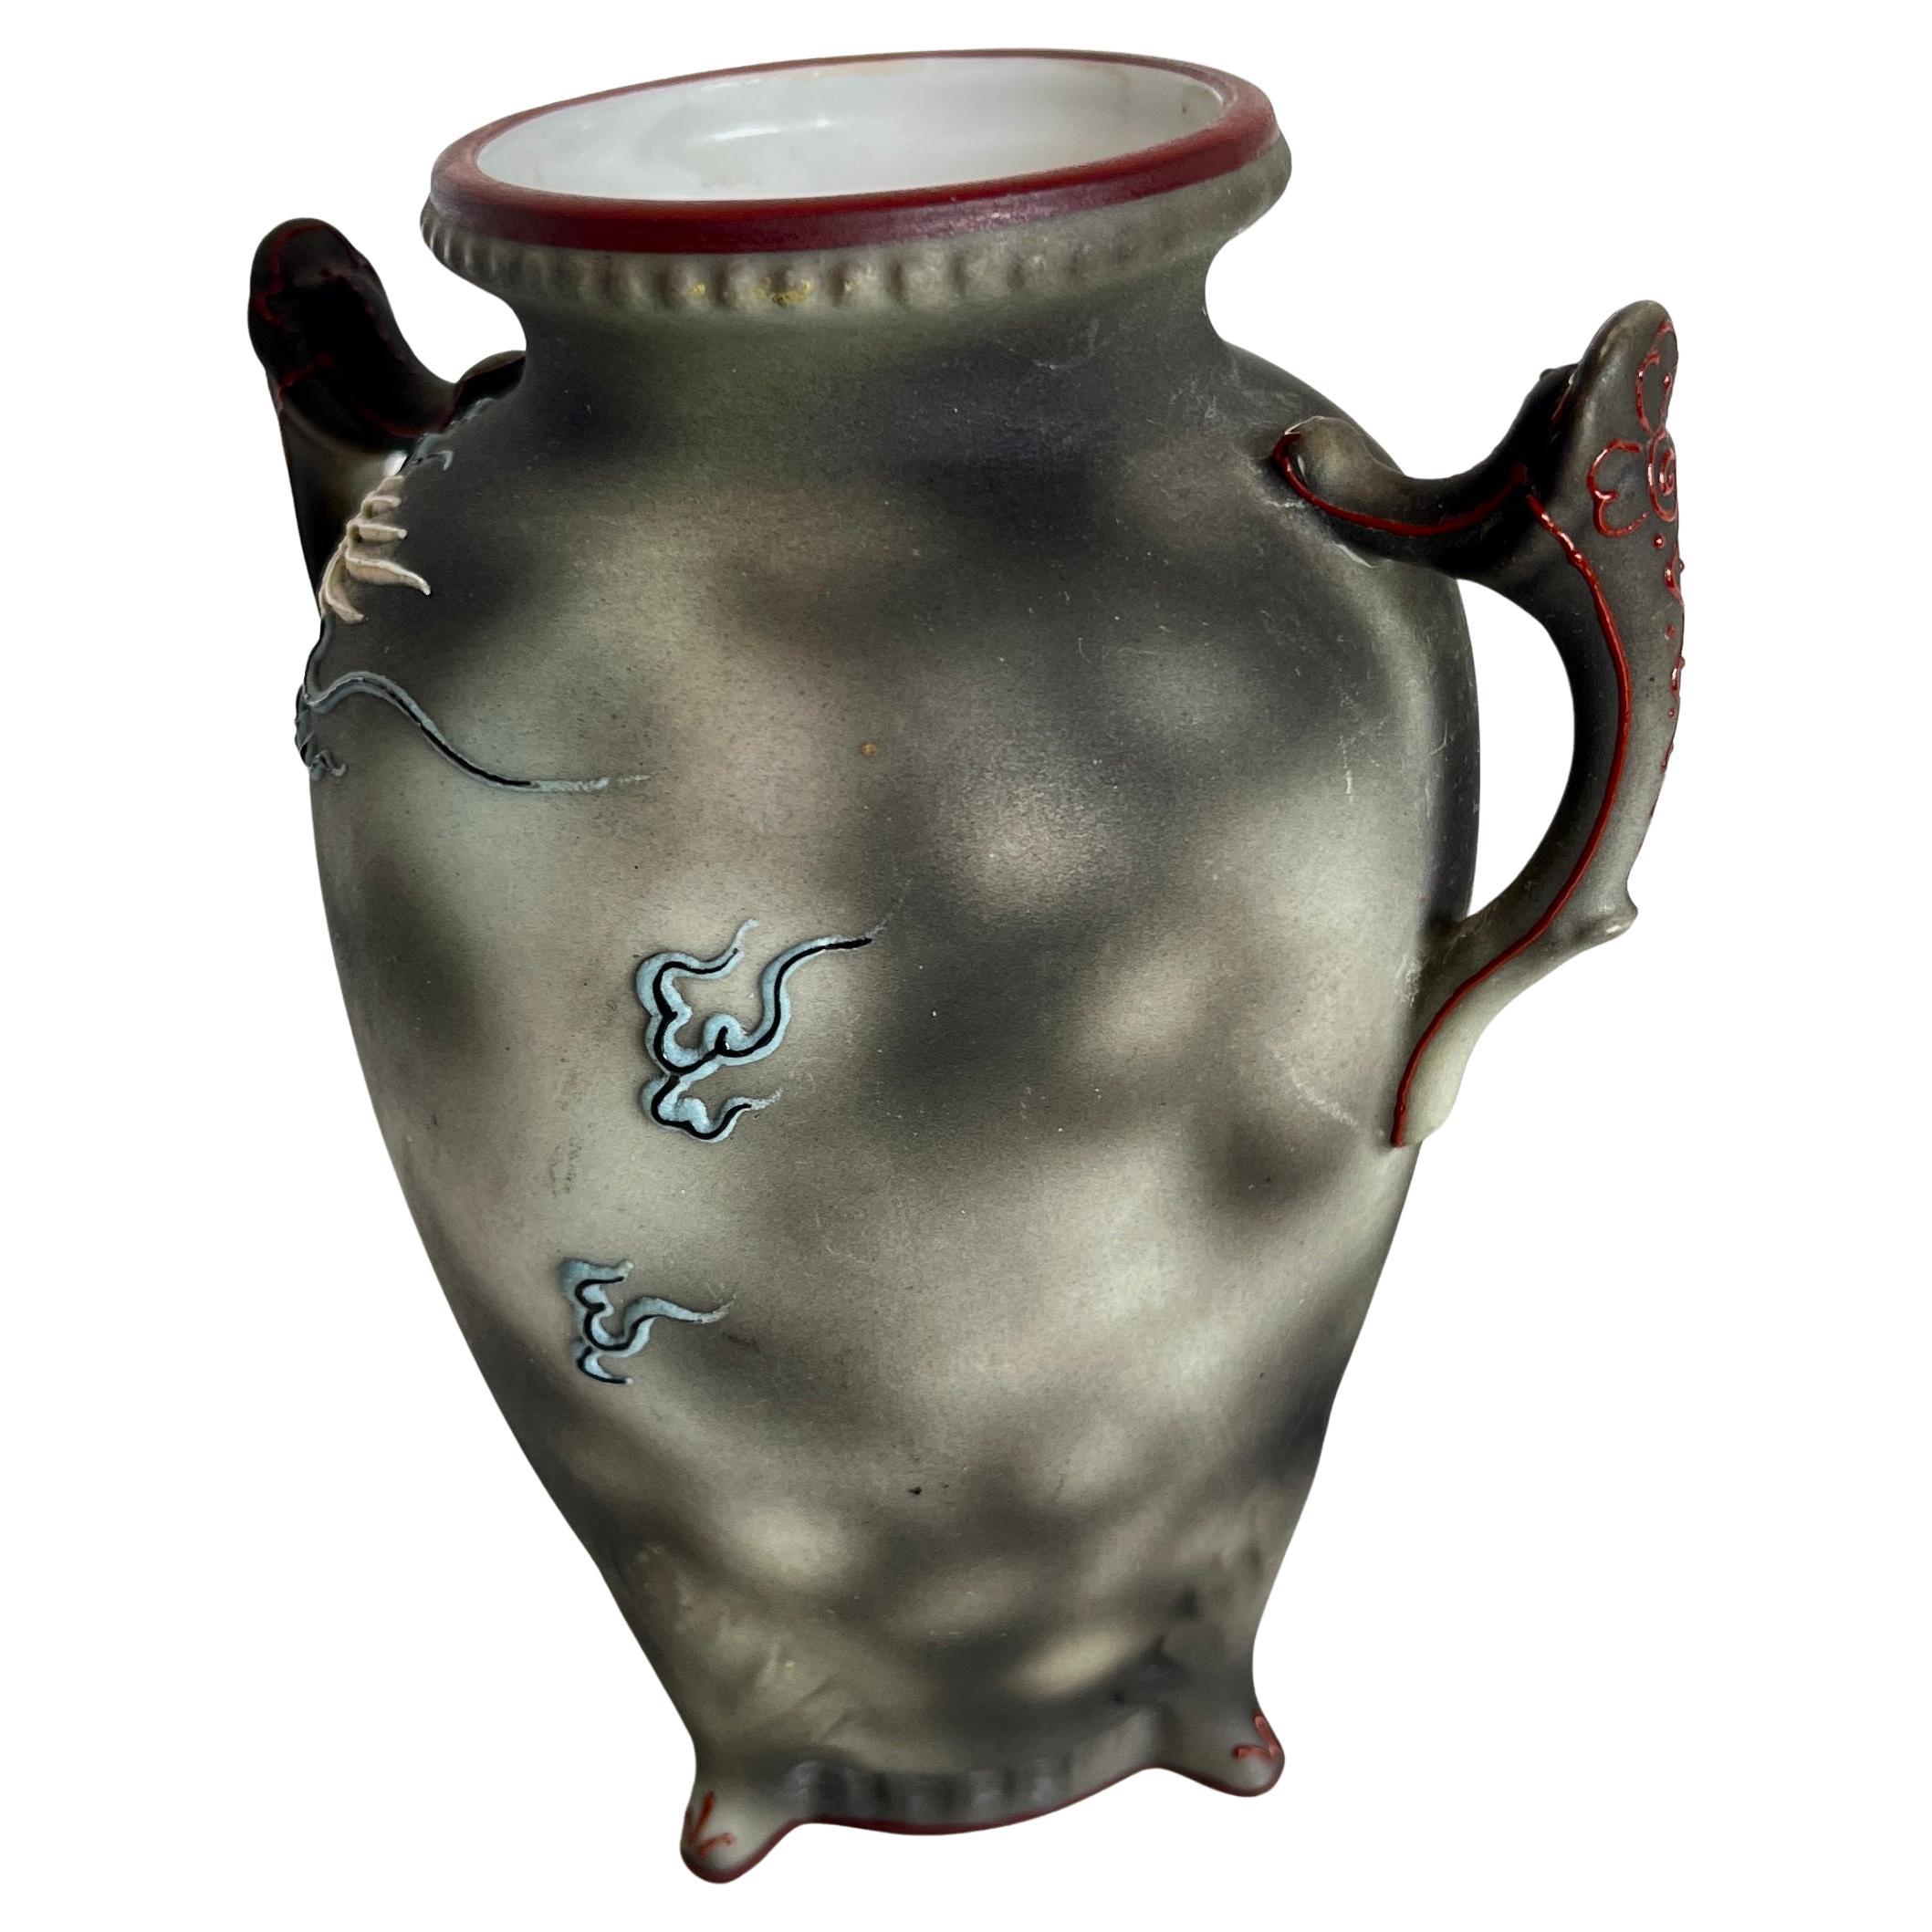 Japanese Noritake petite art vase. This elegant vase is moriage raised relief Dragonware; a dragon encircling the vase on a gray and black background. The intricate painting has splashes of blue, ivory and blush to enhance the body with bold